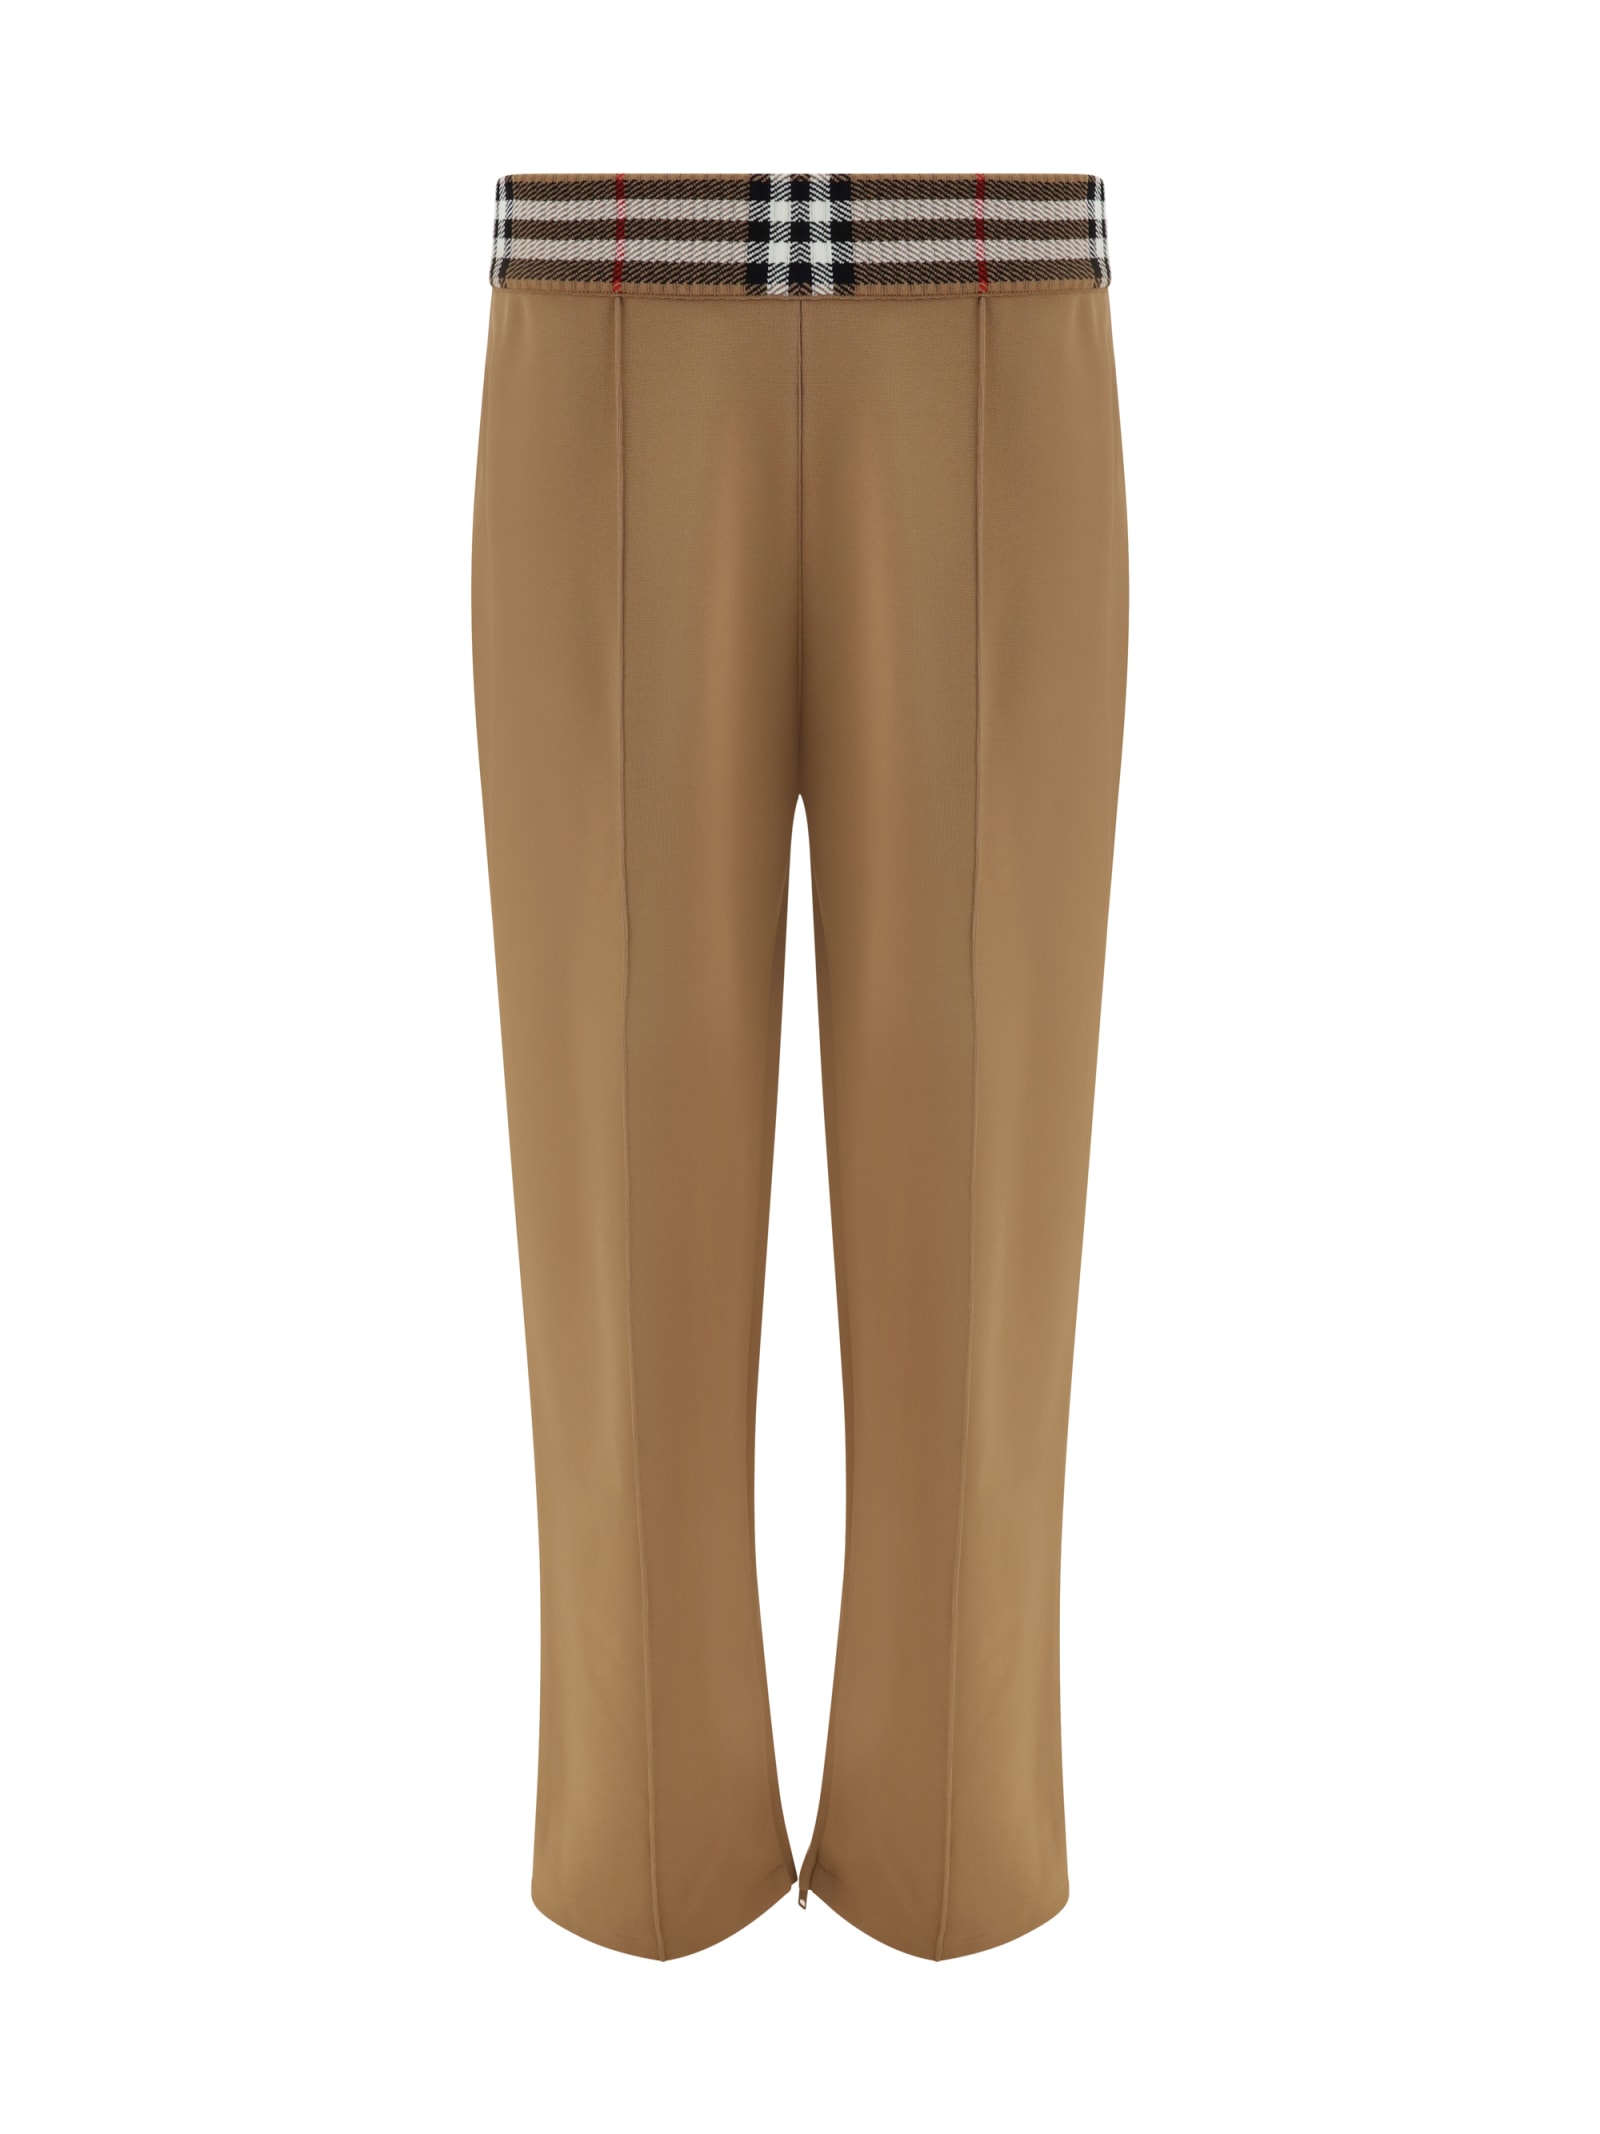 BURBERRY DELLOW trousers